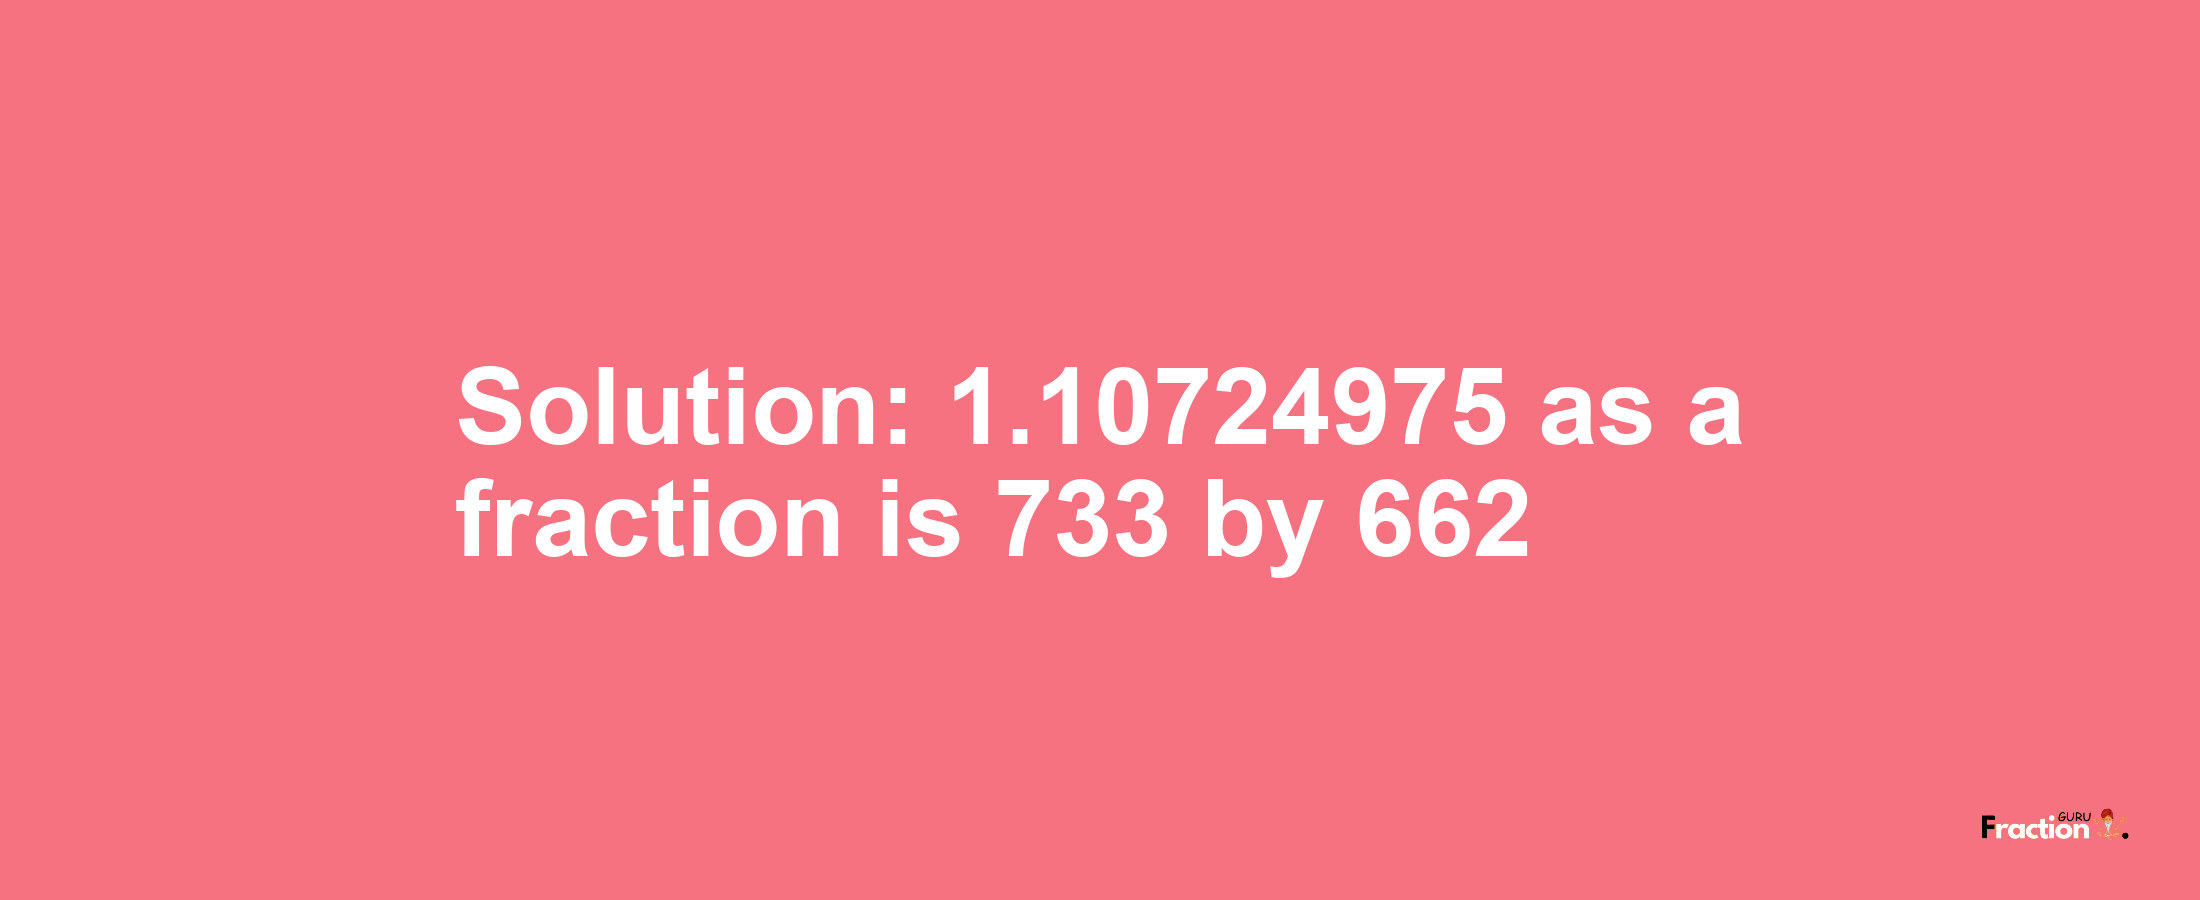 Solution:1.10724975 as a fraction is 733/662